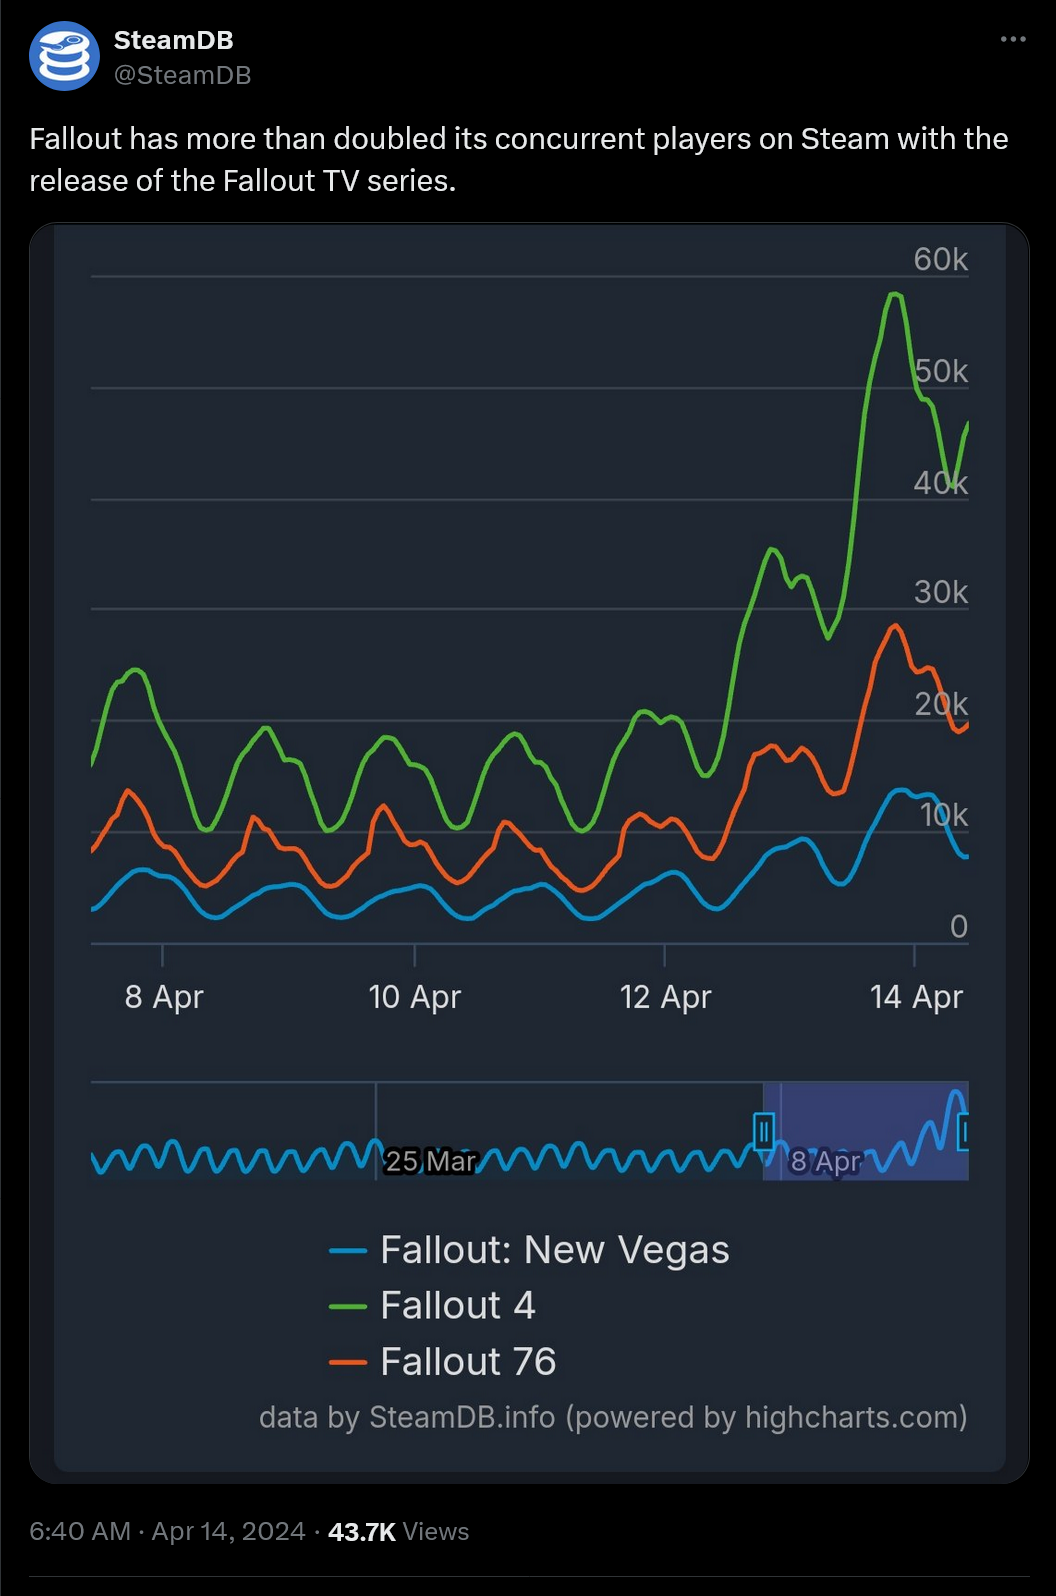 SteamDB chart showing Fallout player counts spiking after the release of the Fallout TV series on Amazon